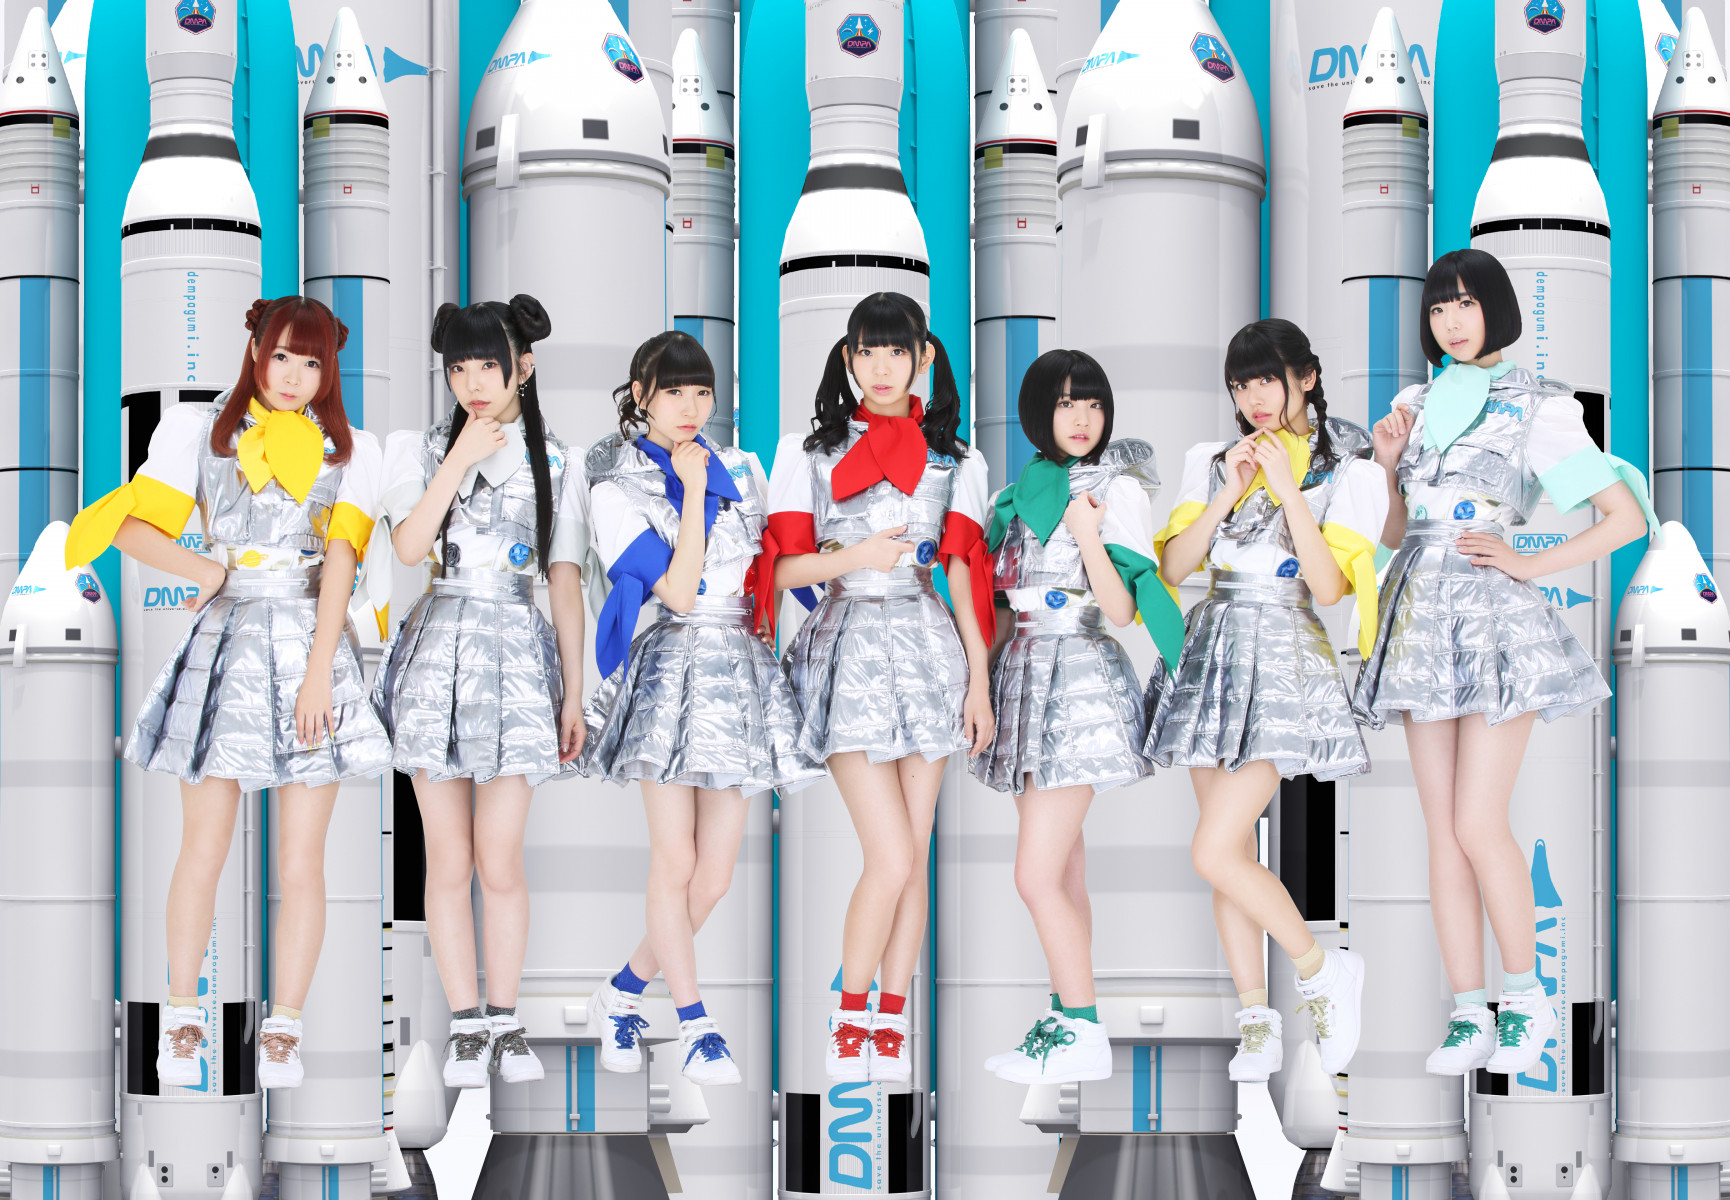 Dempagumi.inc Announce Details of their First Single After the New Form!